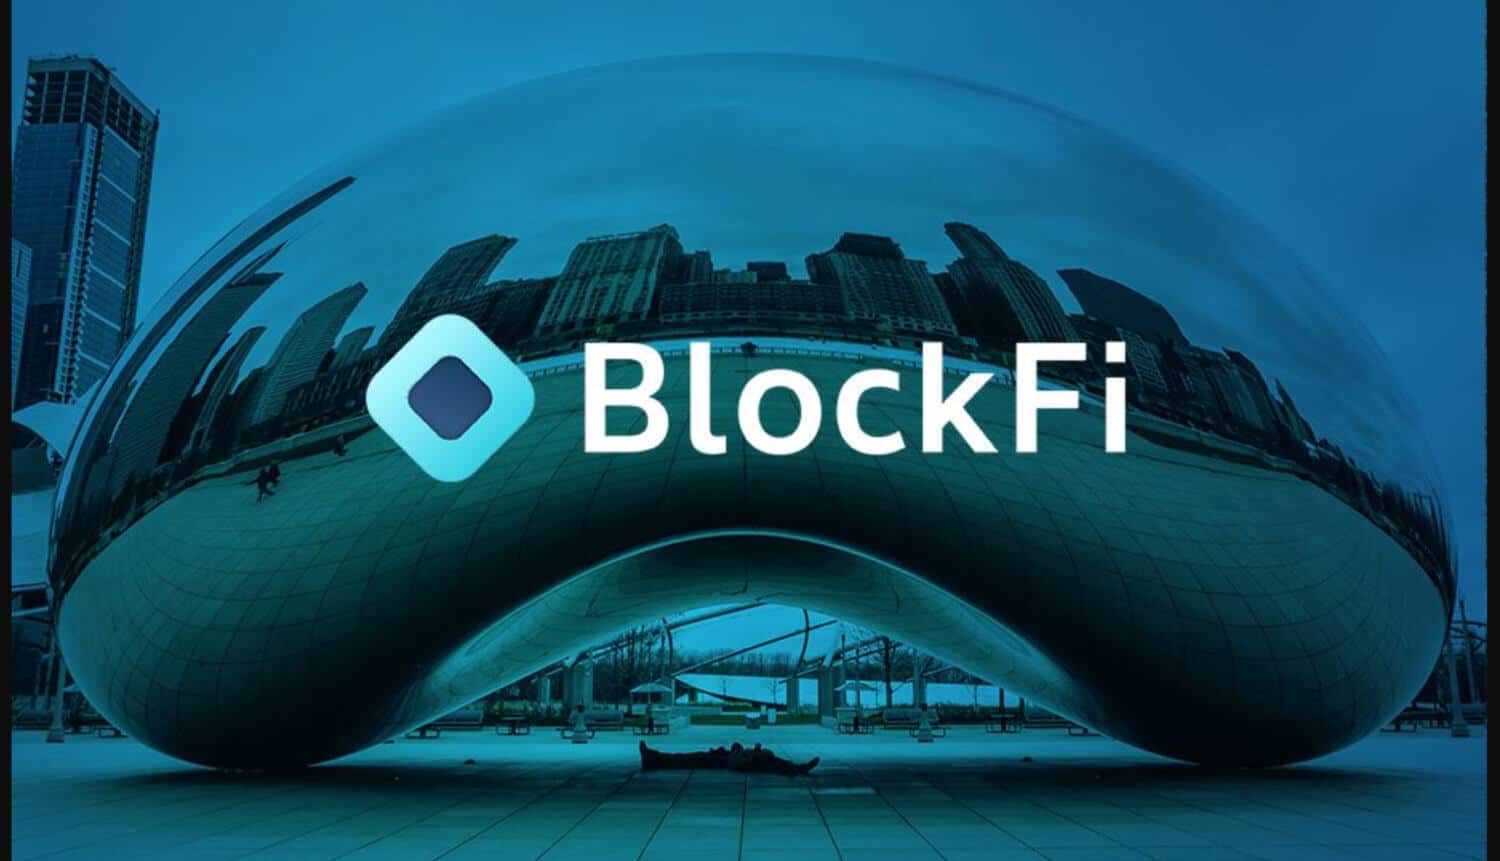 BlockFi Clients To Earn Interest On Any Amount Of Crypto Holdings